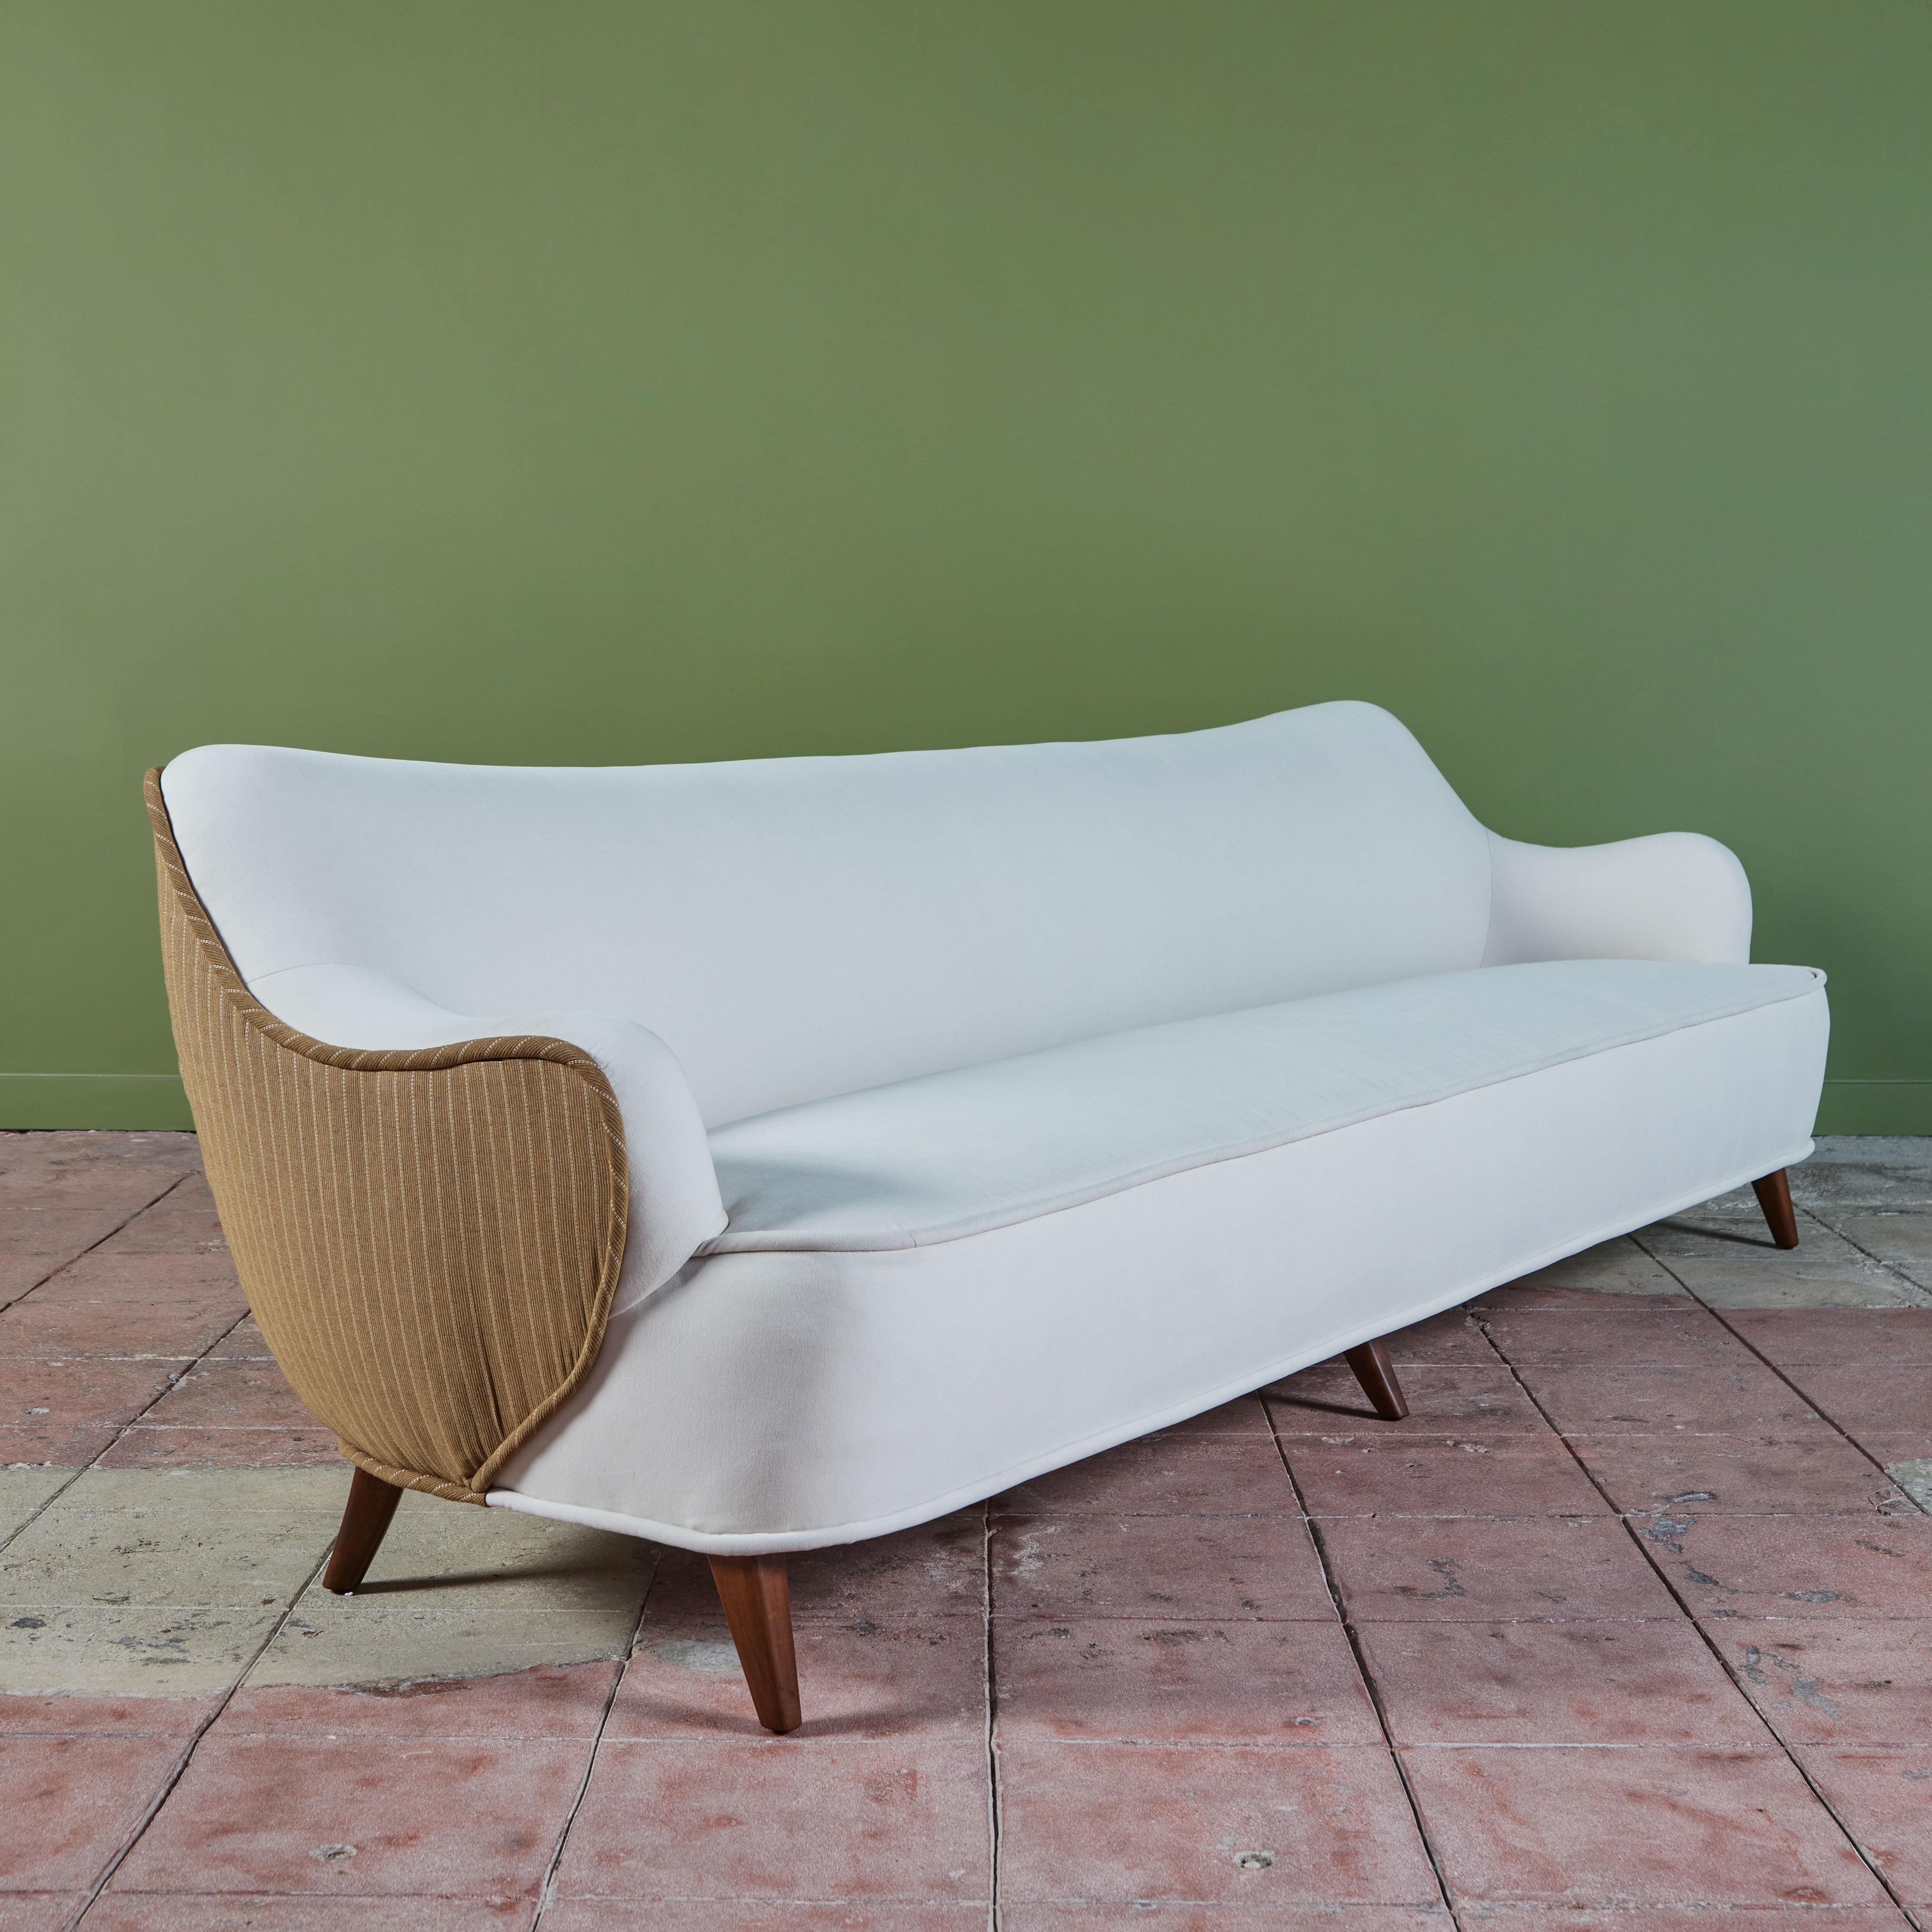 Long Barrel Back sofa by Vladimir Kagan for Kagan-Dreyfuss, c.1950s, USA. We're happy to present this piece in collaboration with Armando Aguirre of Studio Armando Aguirre. Armando, who advised on upholstery, was inspired by the organic forms of